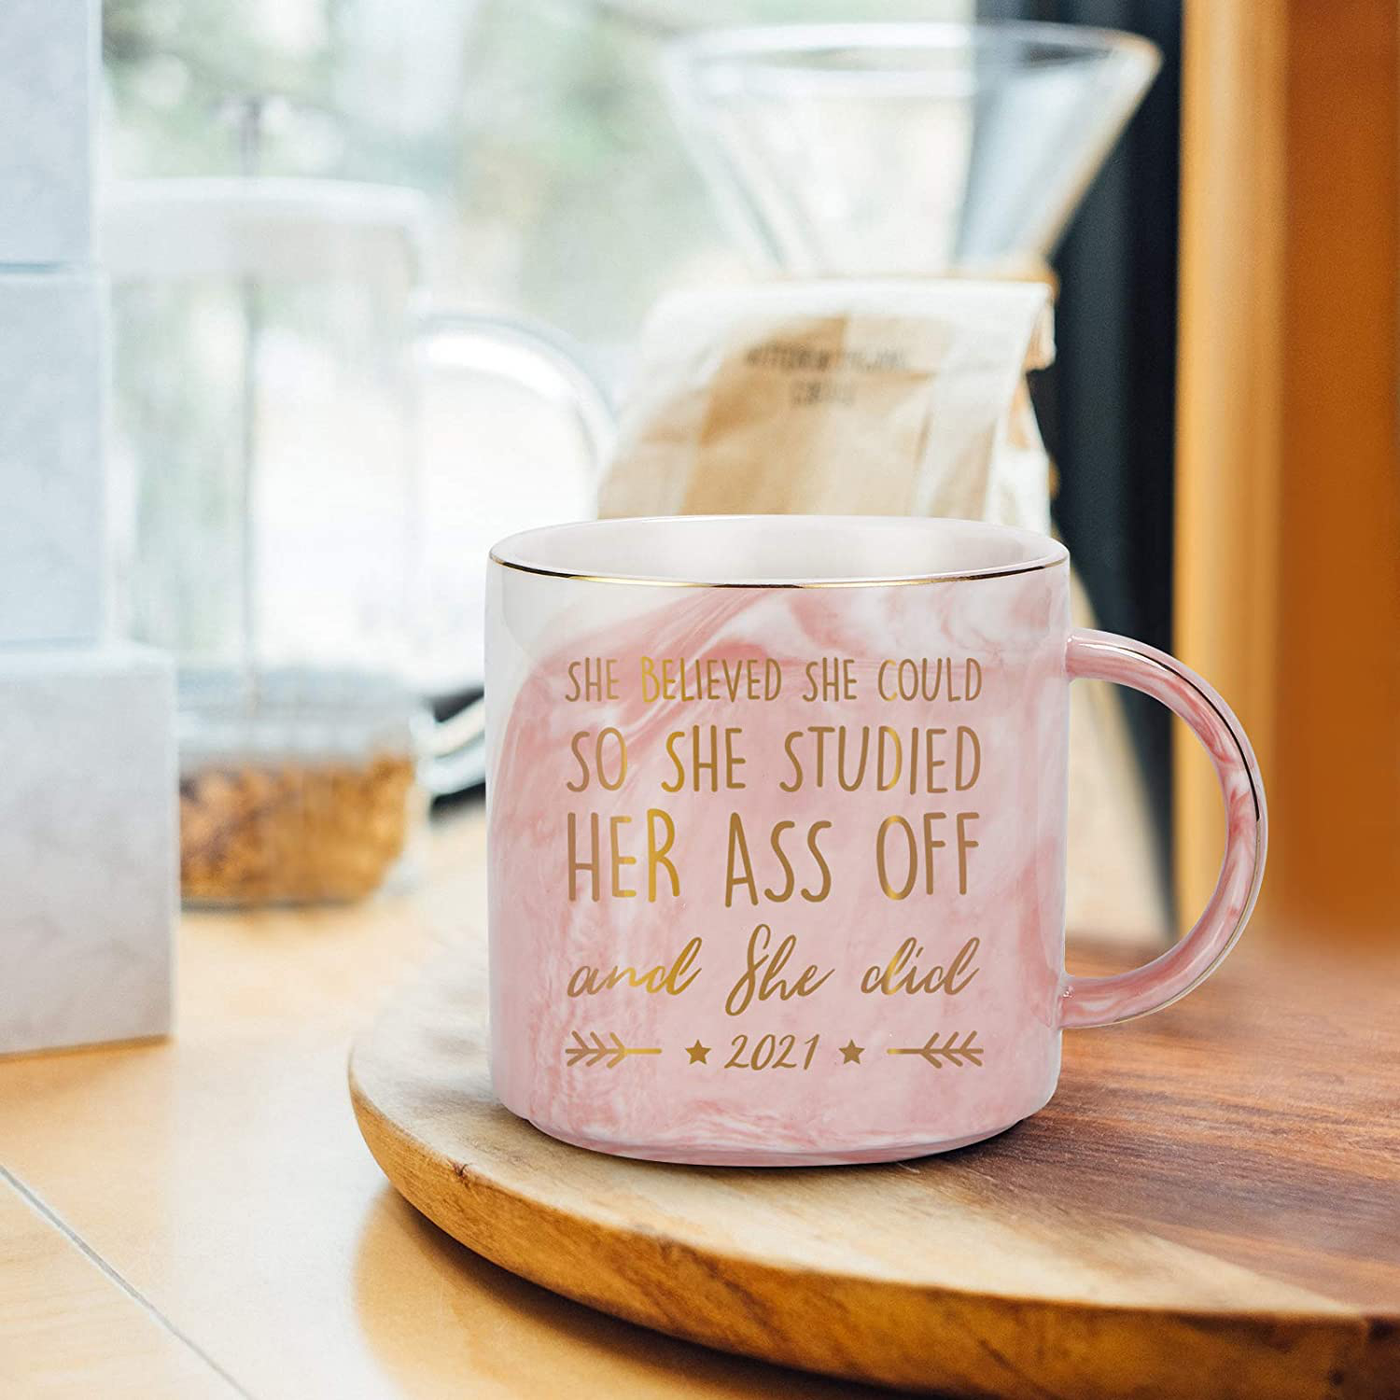 She Believed She Could So She Did Mug 2021 Congratulations Gifts Graduation Gifts for Her Valentines Day Gifts for Her Inspirational Gifts Encouragement Gifts for Women Marble Mug 12Oz with Gift Box